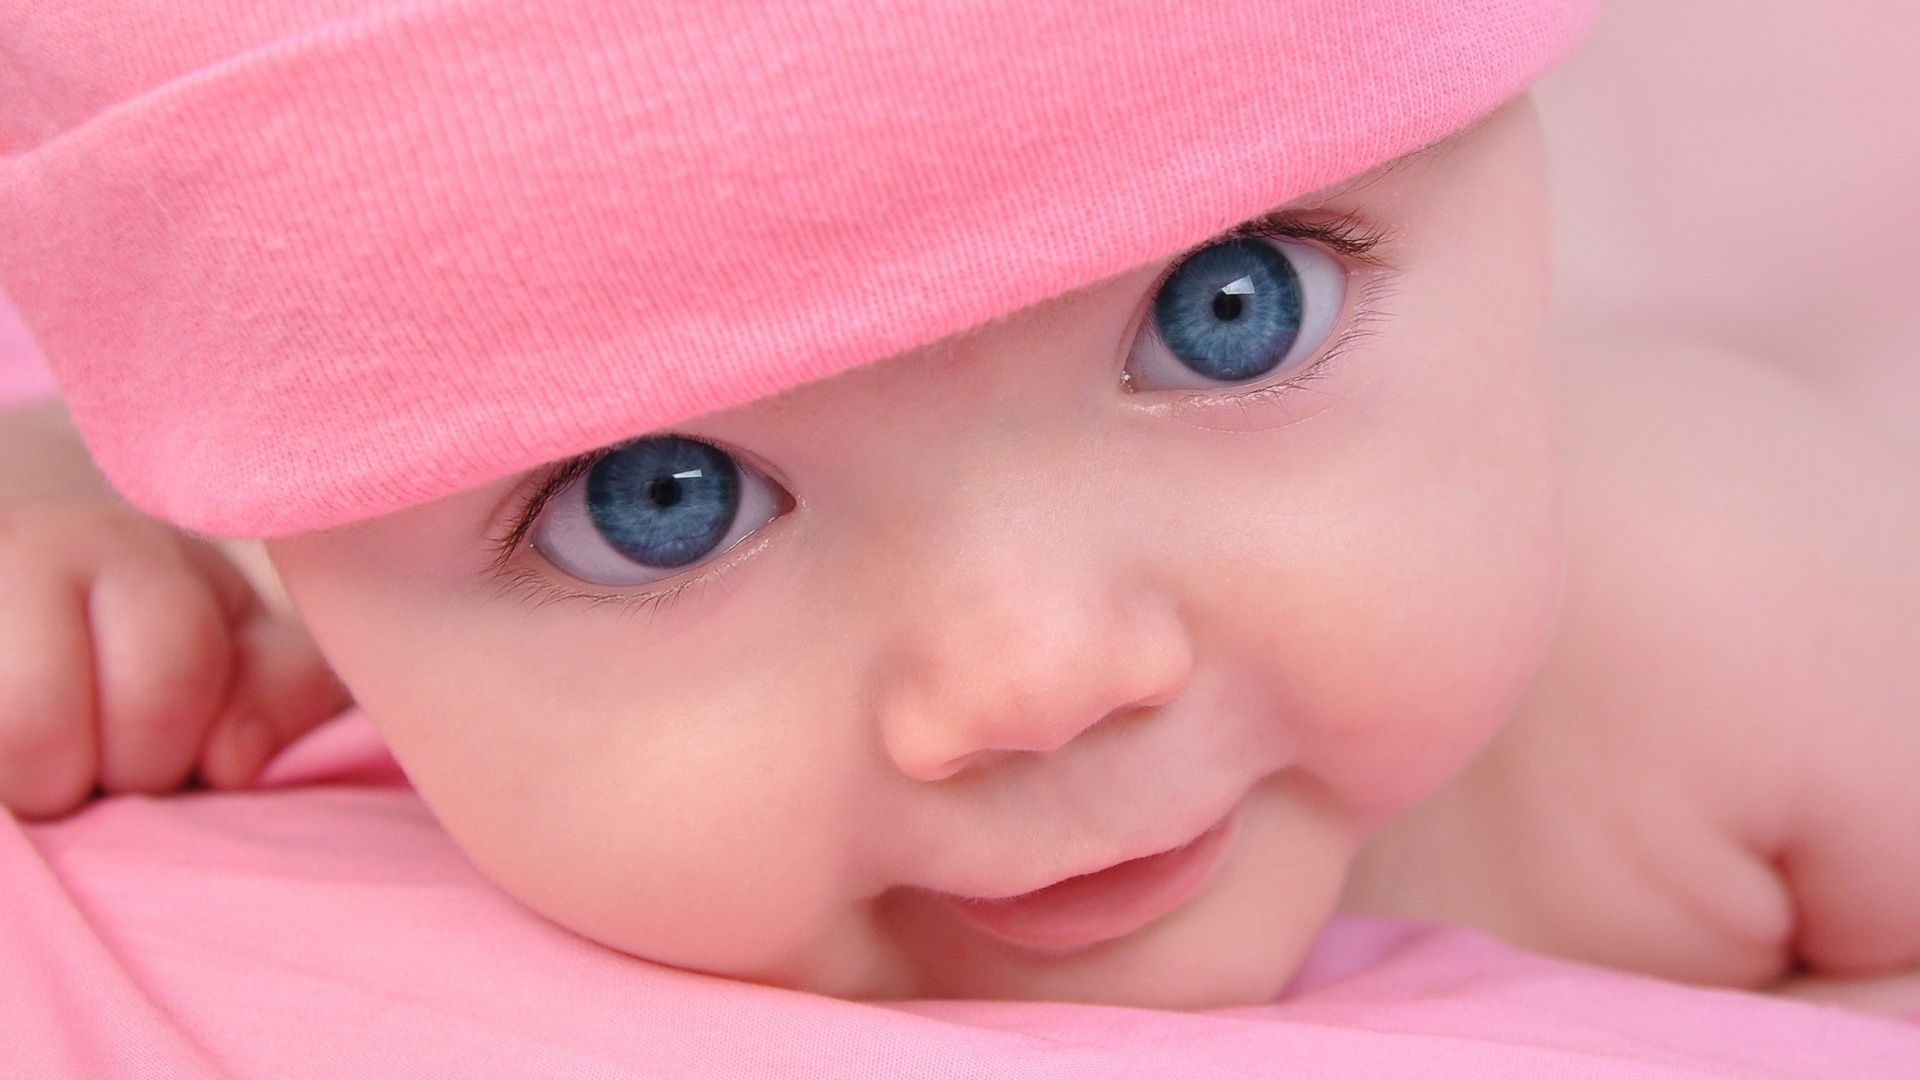 Picture Of Cute Baby Wallpapers